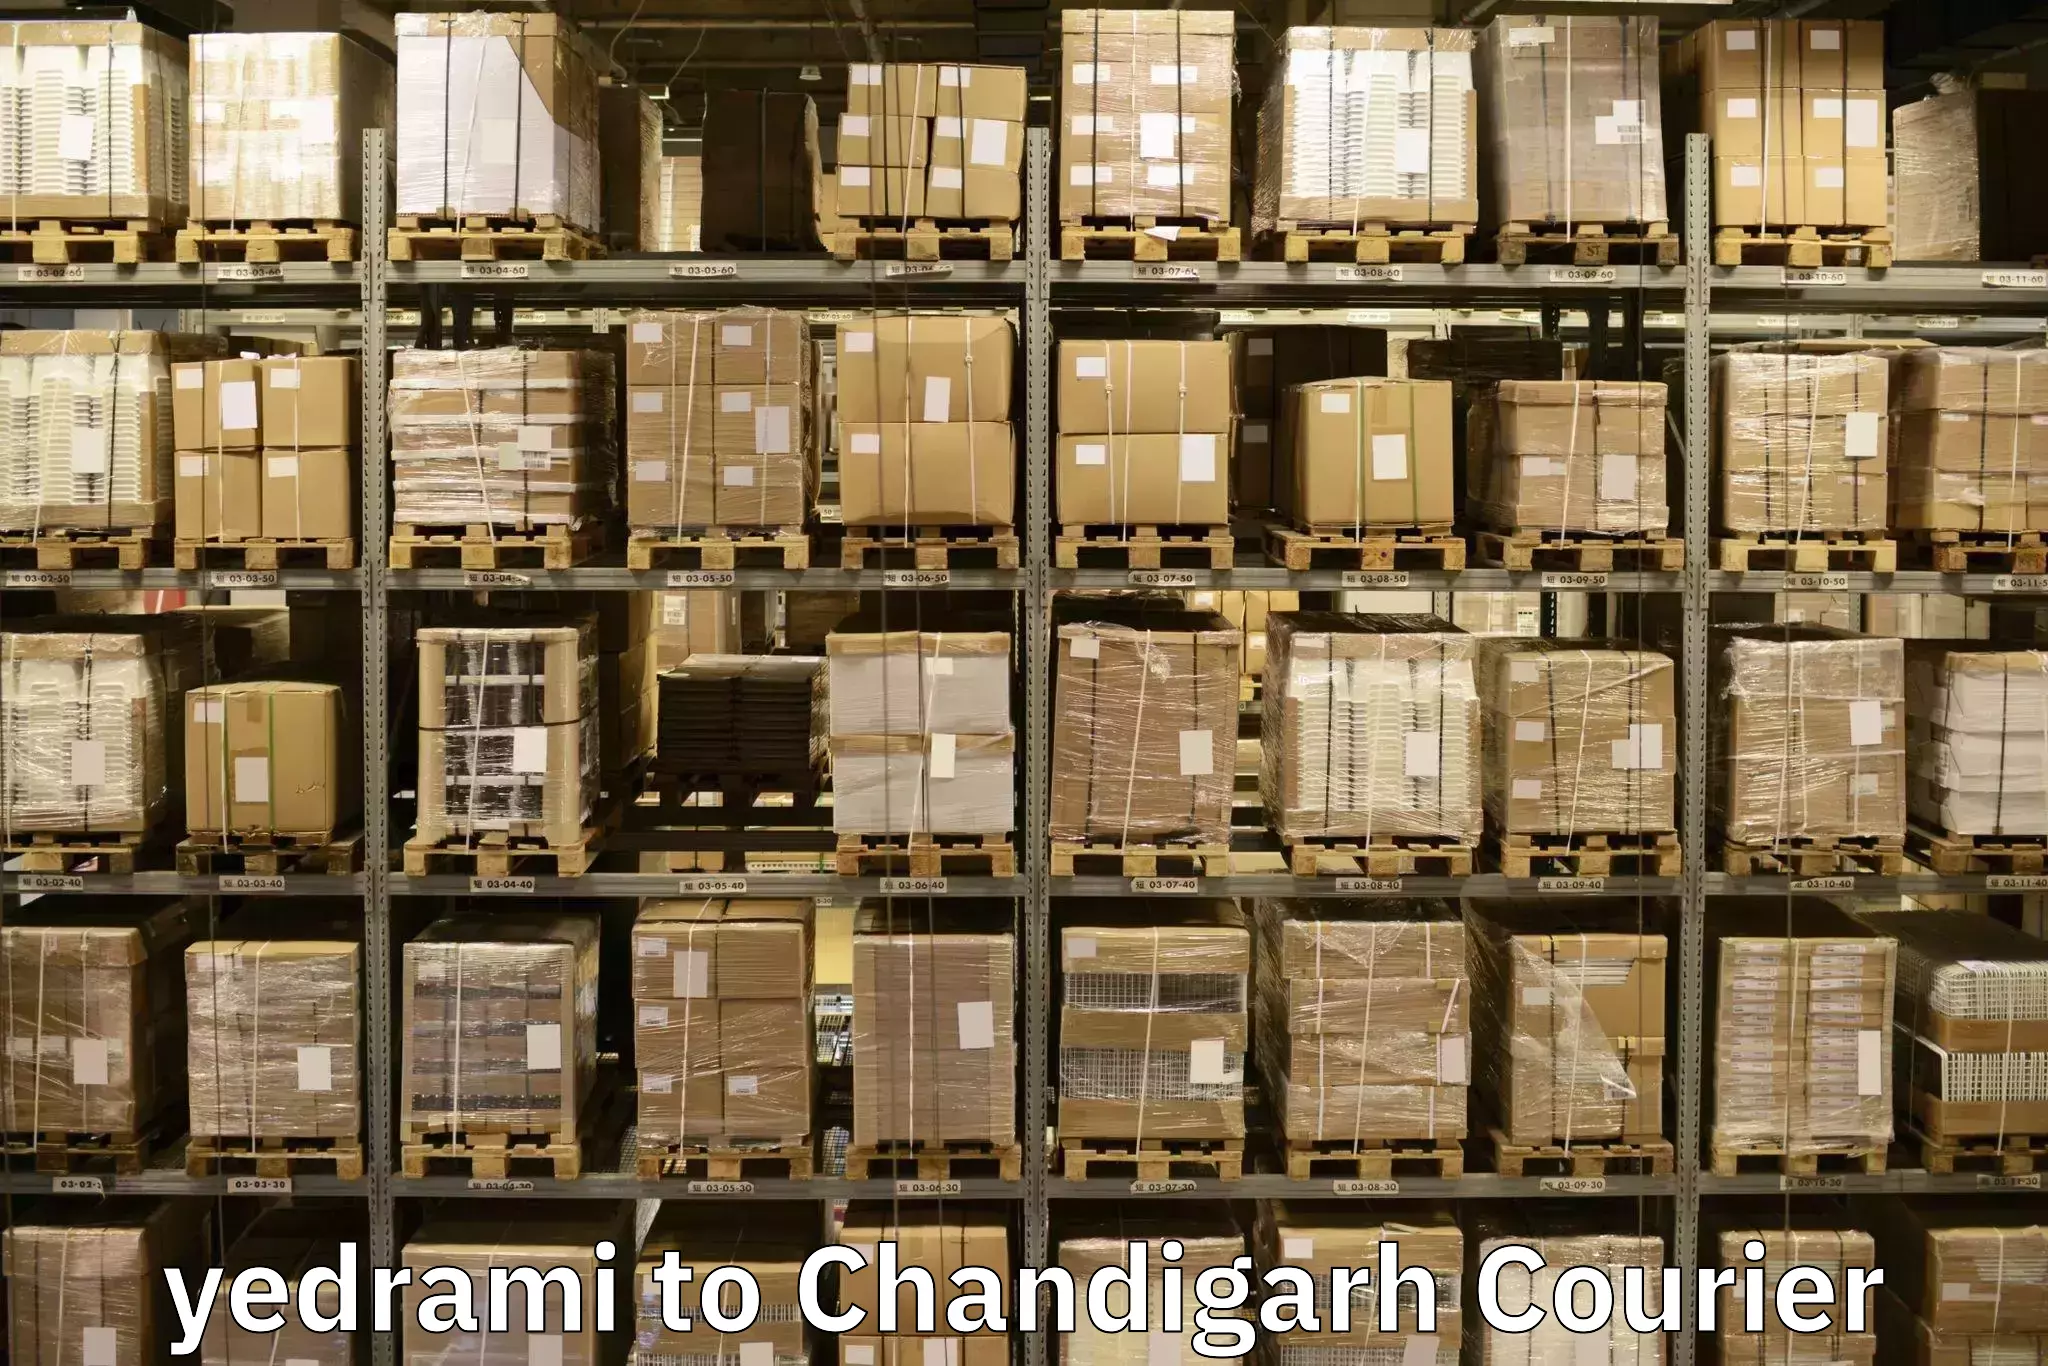 Quality relocation services yedrami to Chandigarh